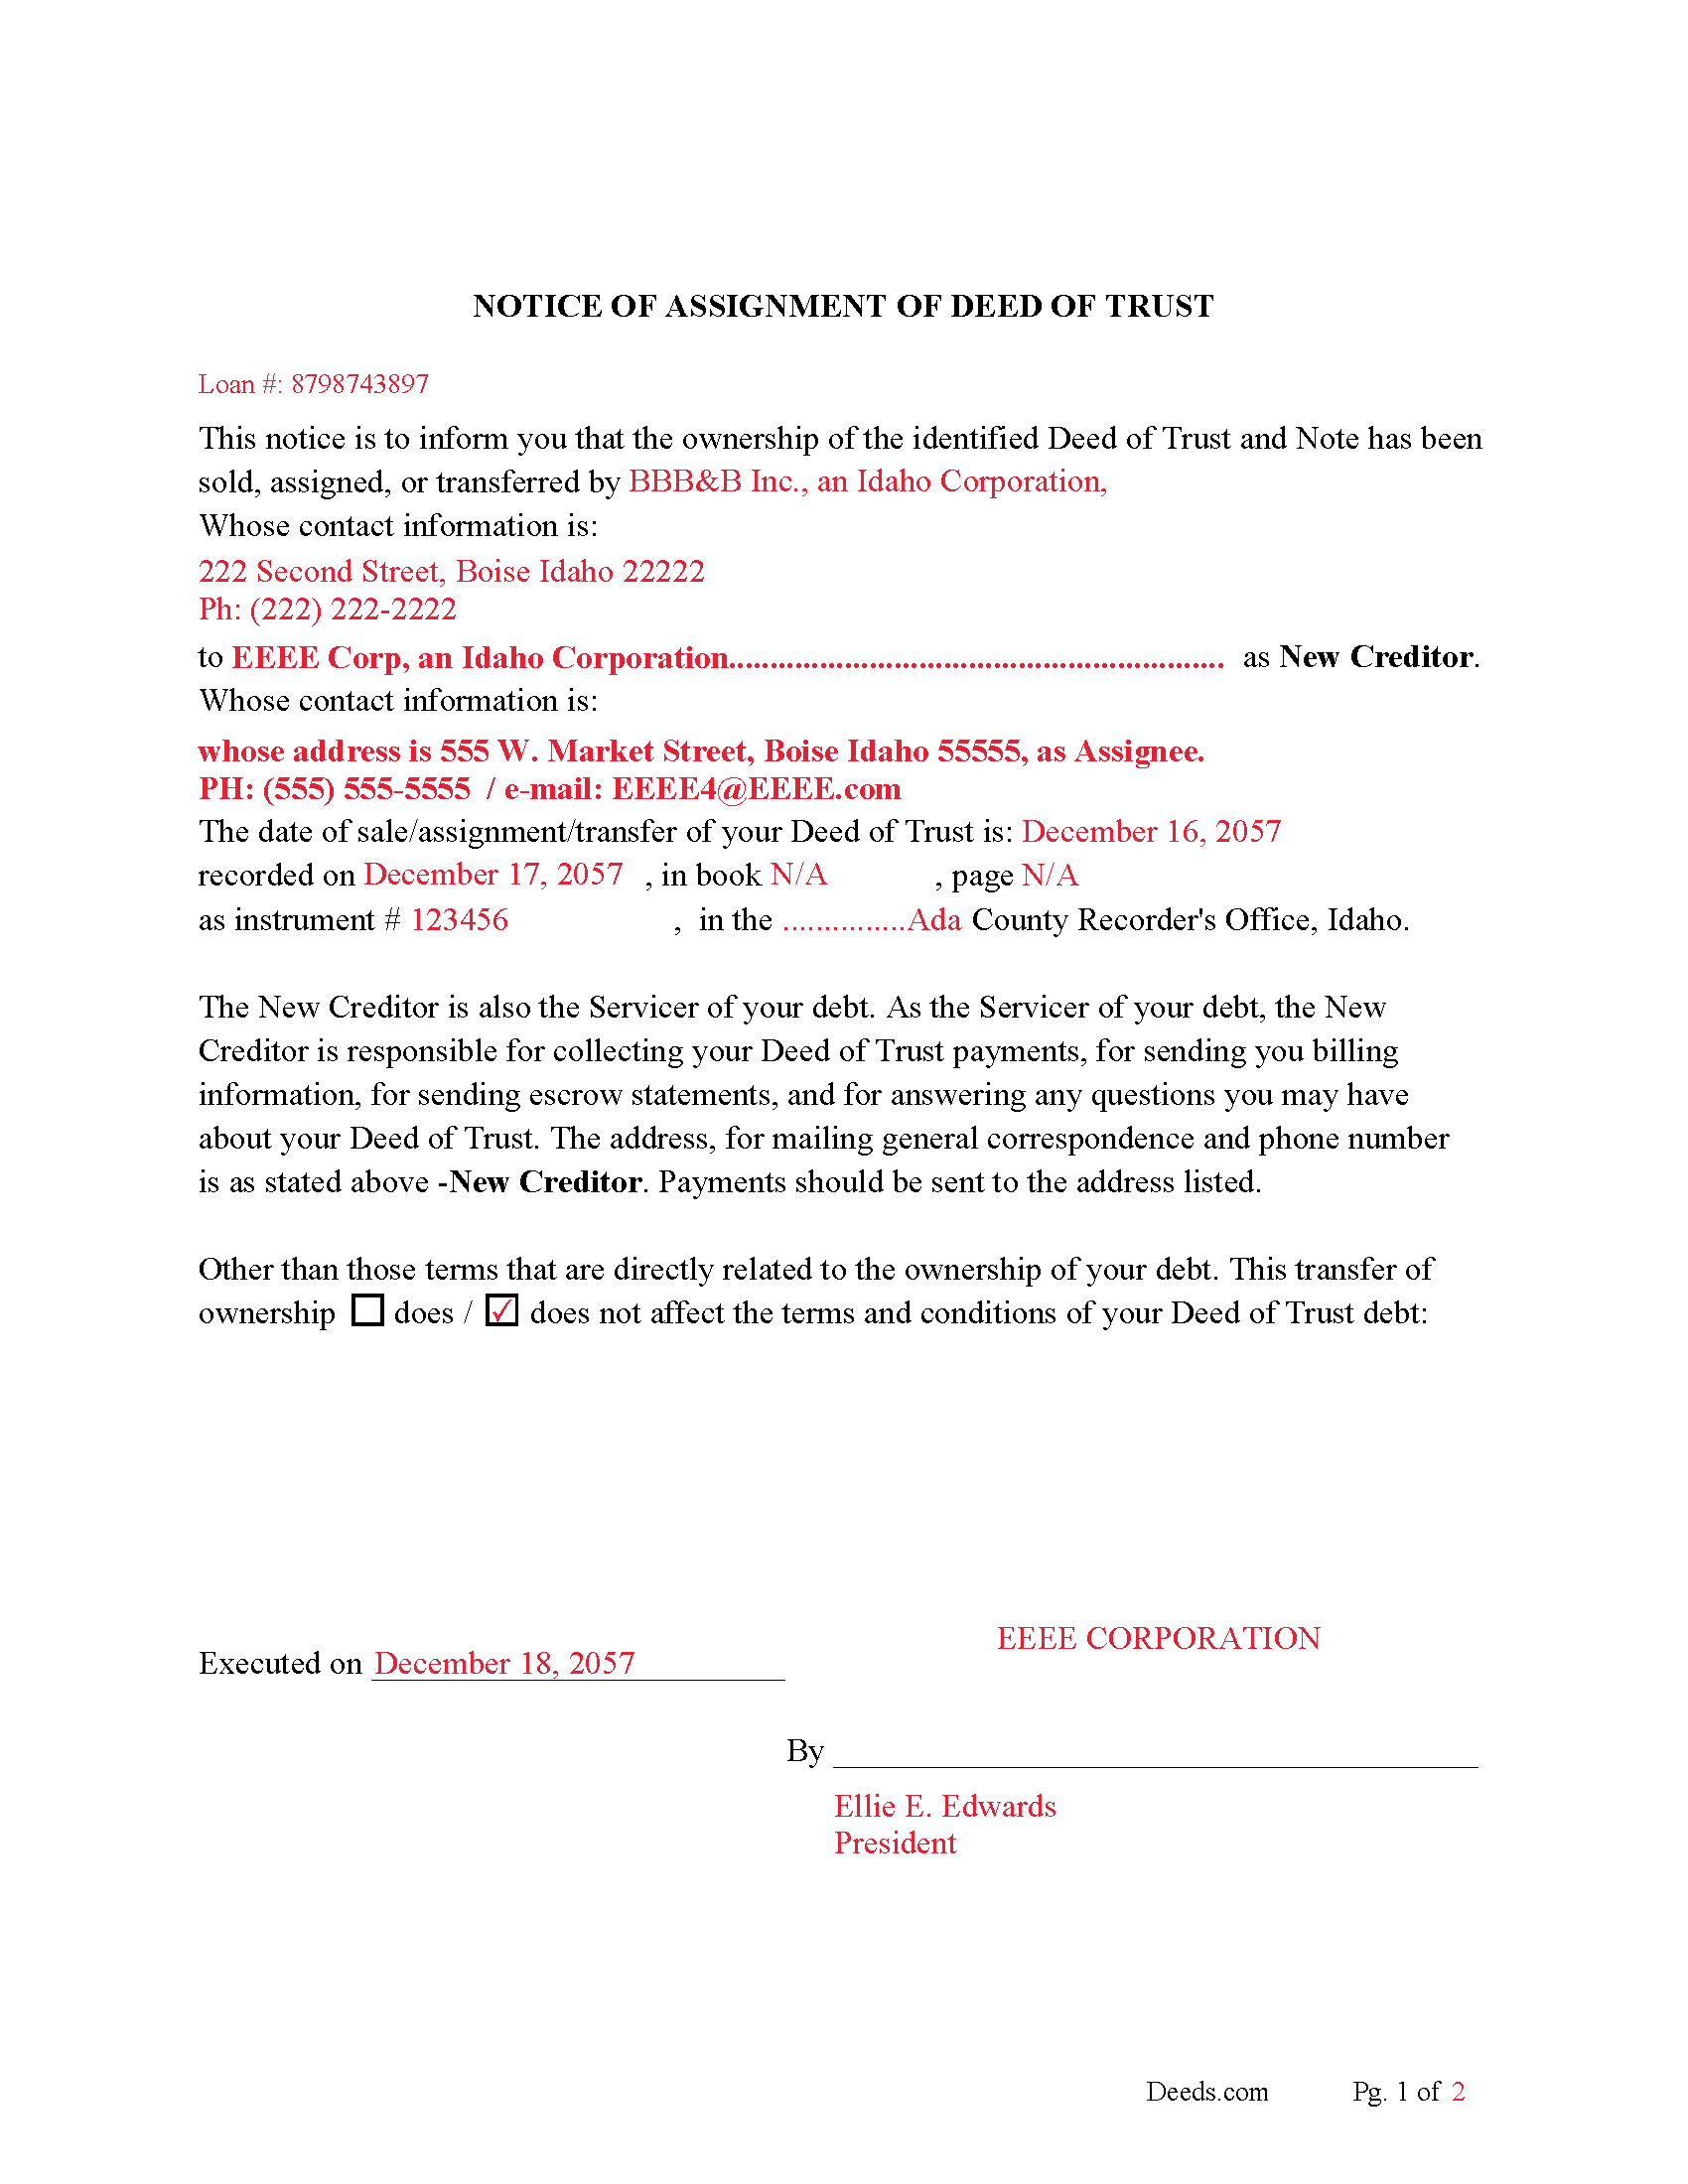 Completed Example of the Notice of Assignment of Deed of Trust Document